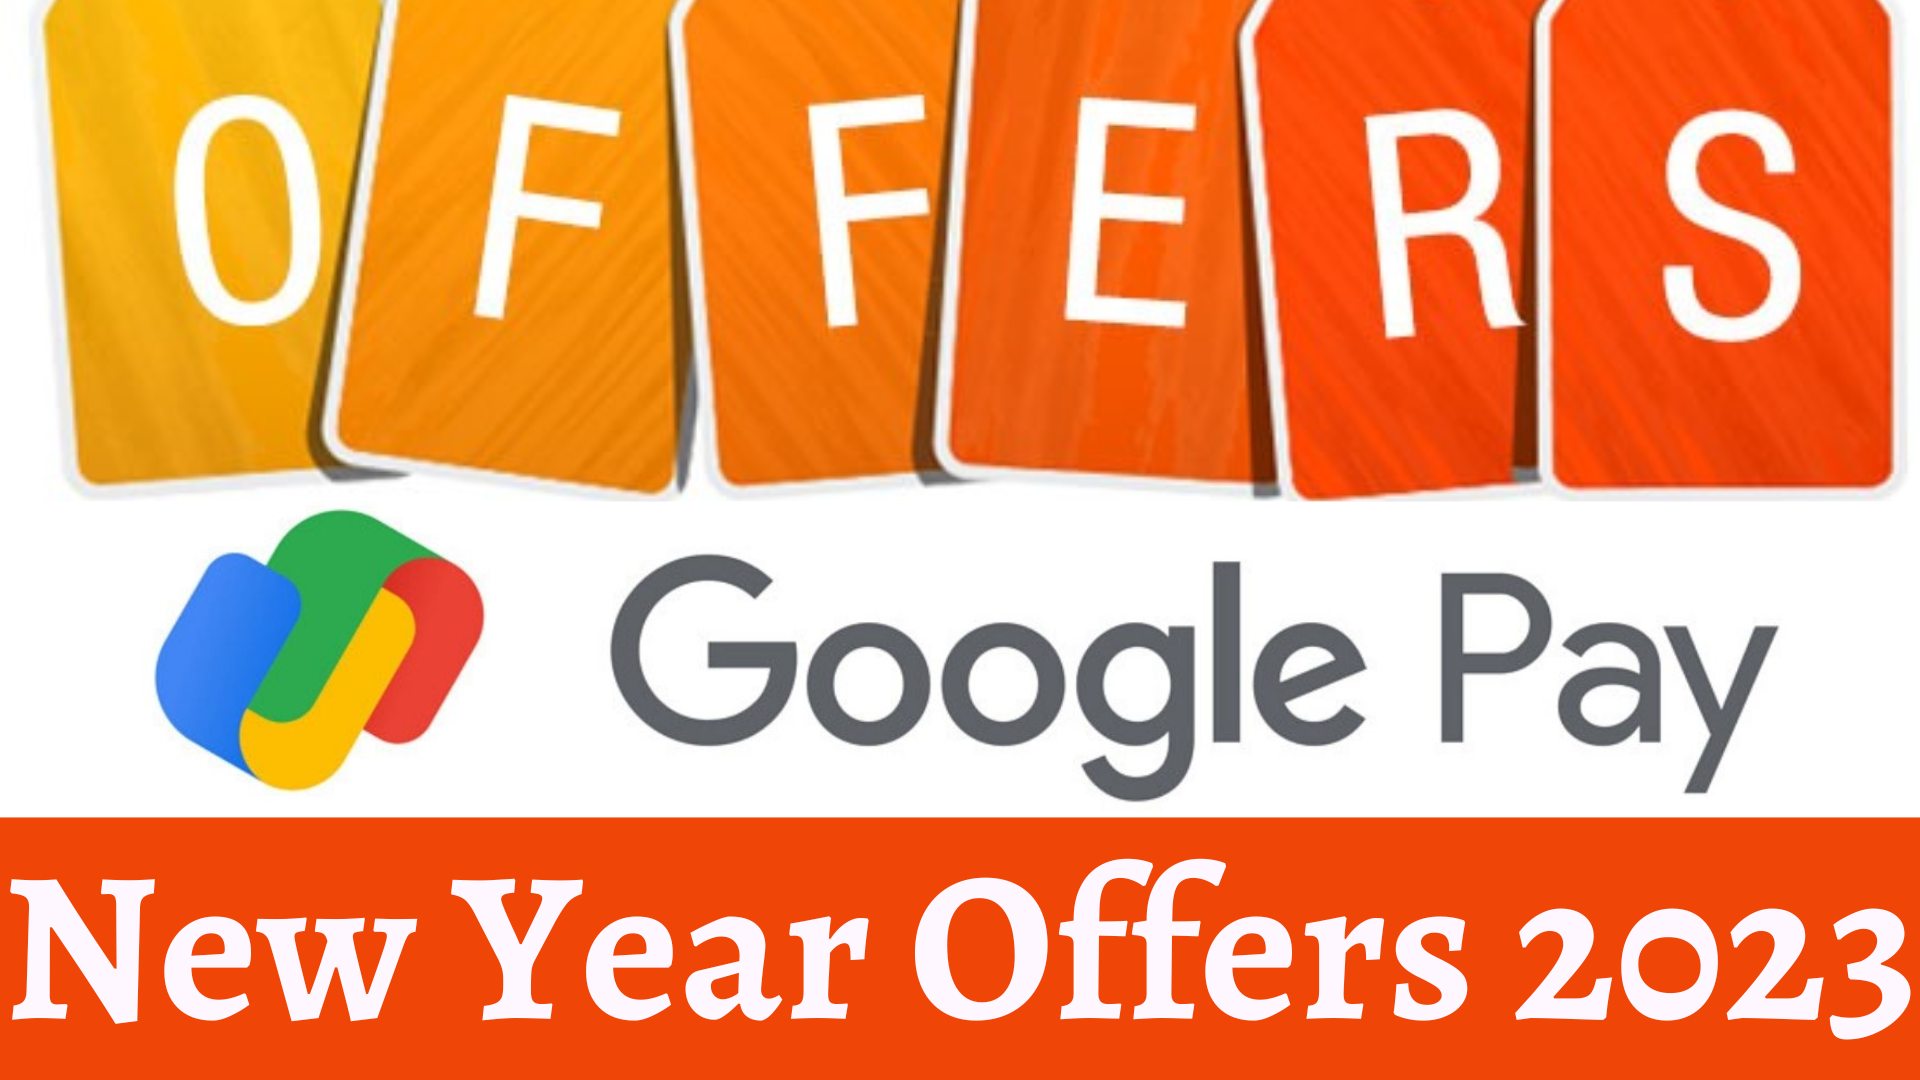 Google Pay New Year Offers 2023: 5 Best Offers